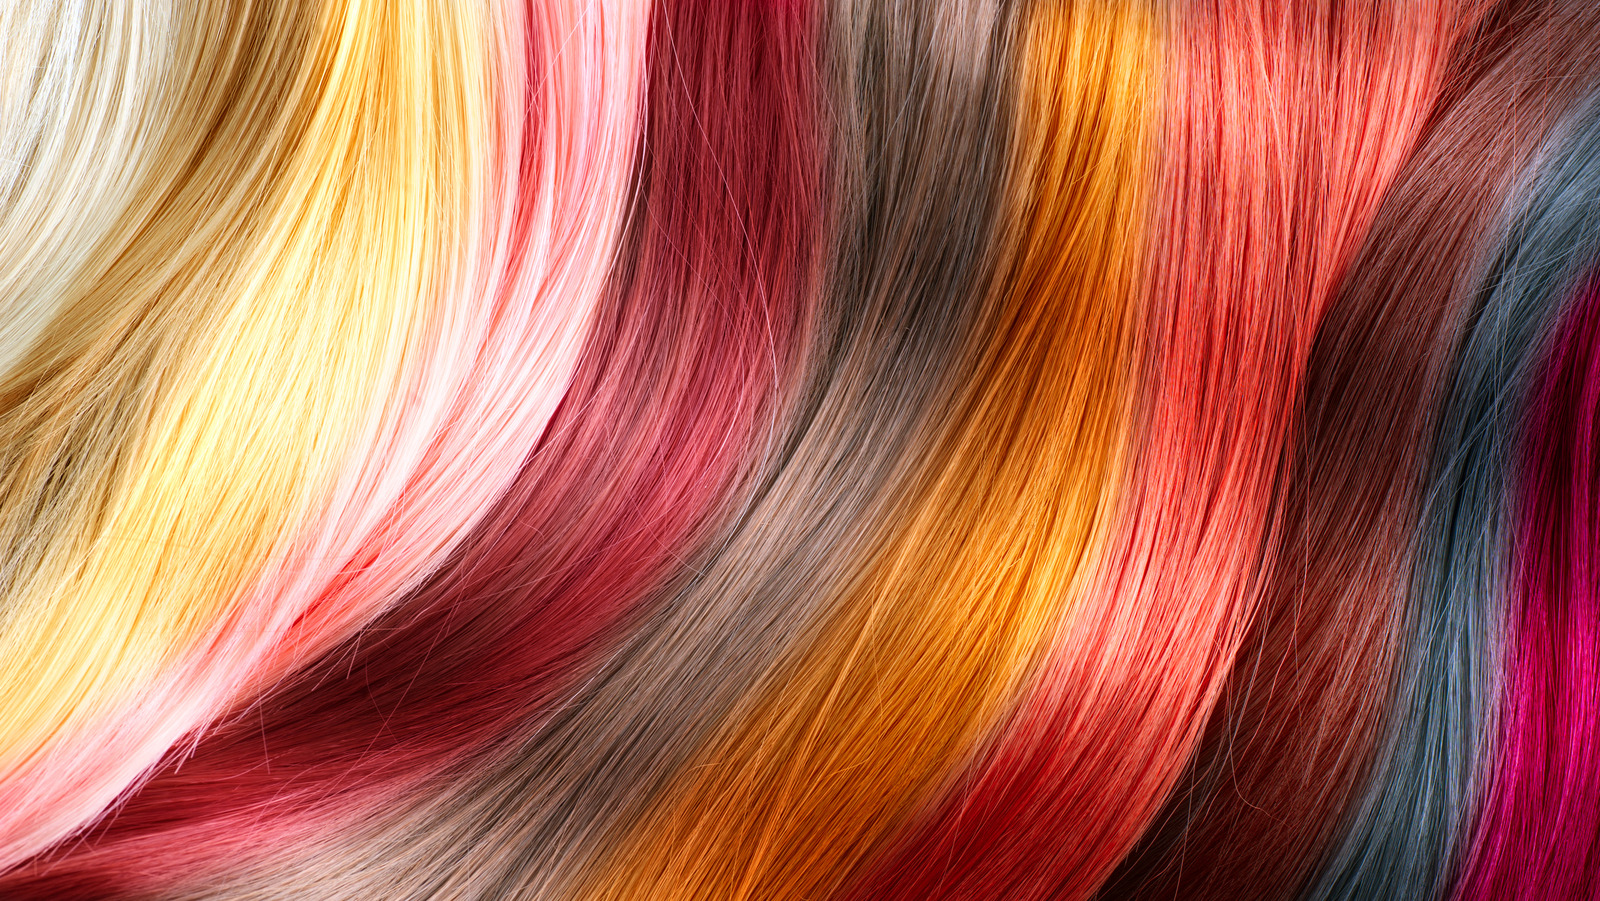 Which Dyed Hair Color Fades The Fastest?